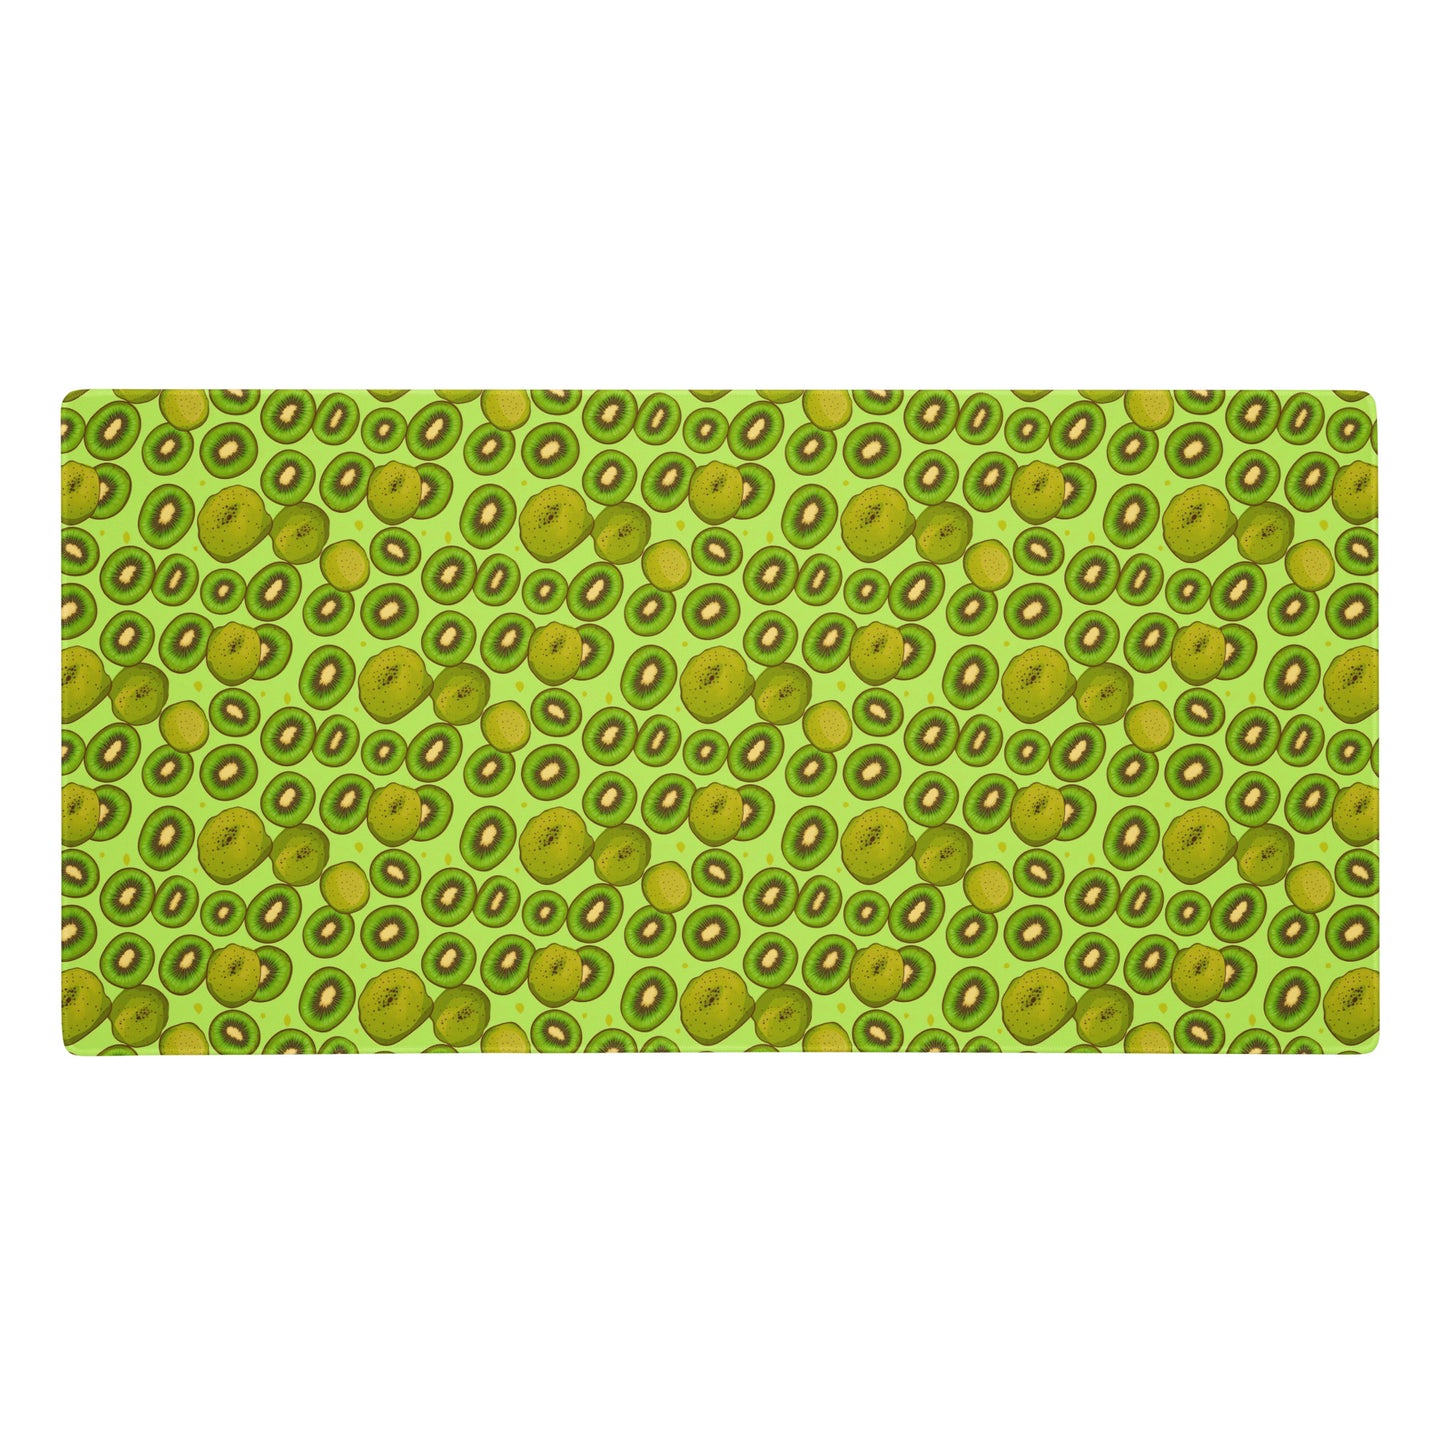 A 36" x 18" desk pad with Kiwis all over it. Green in color.